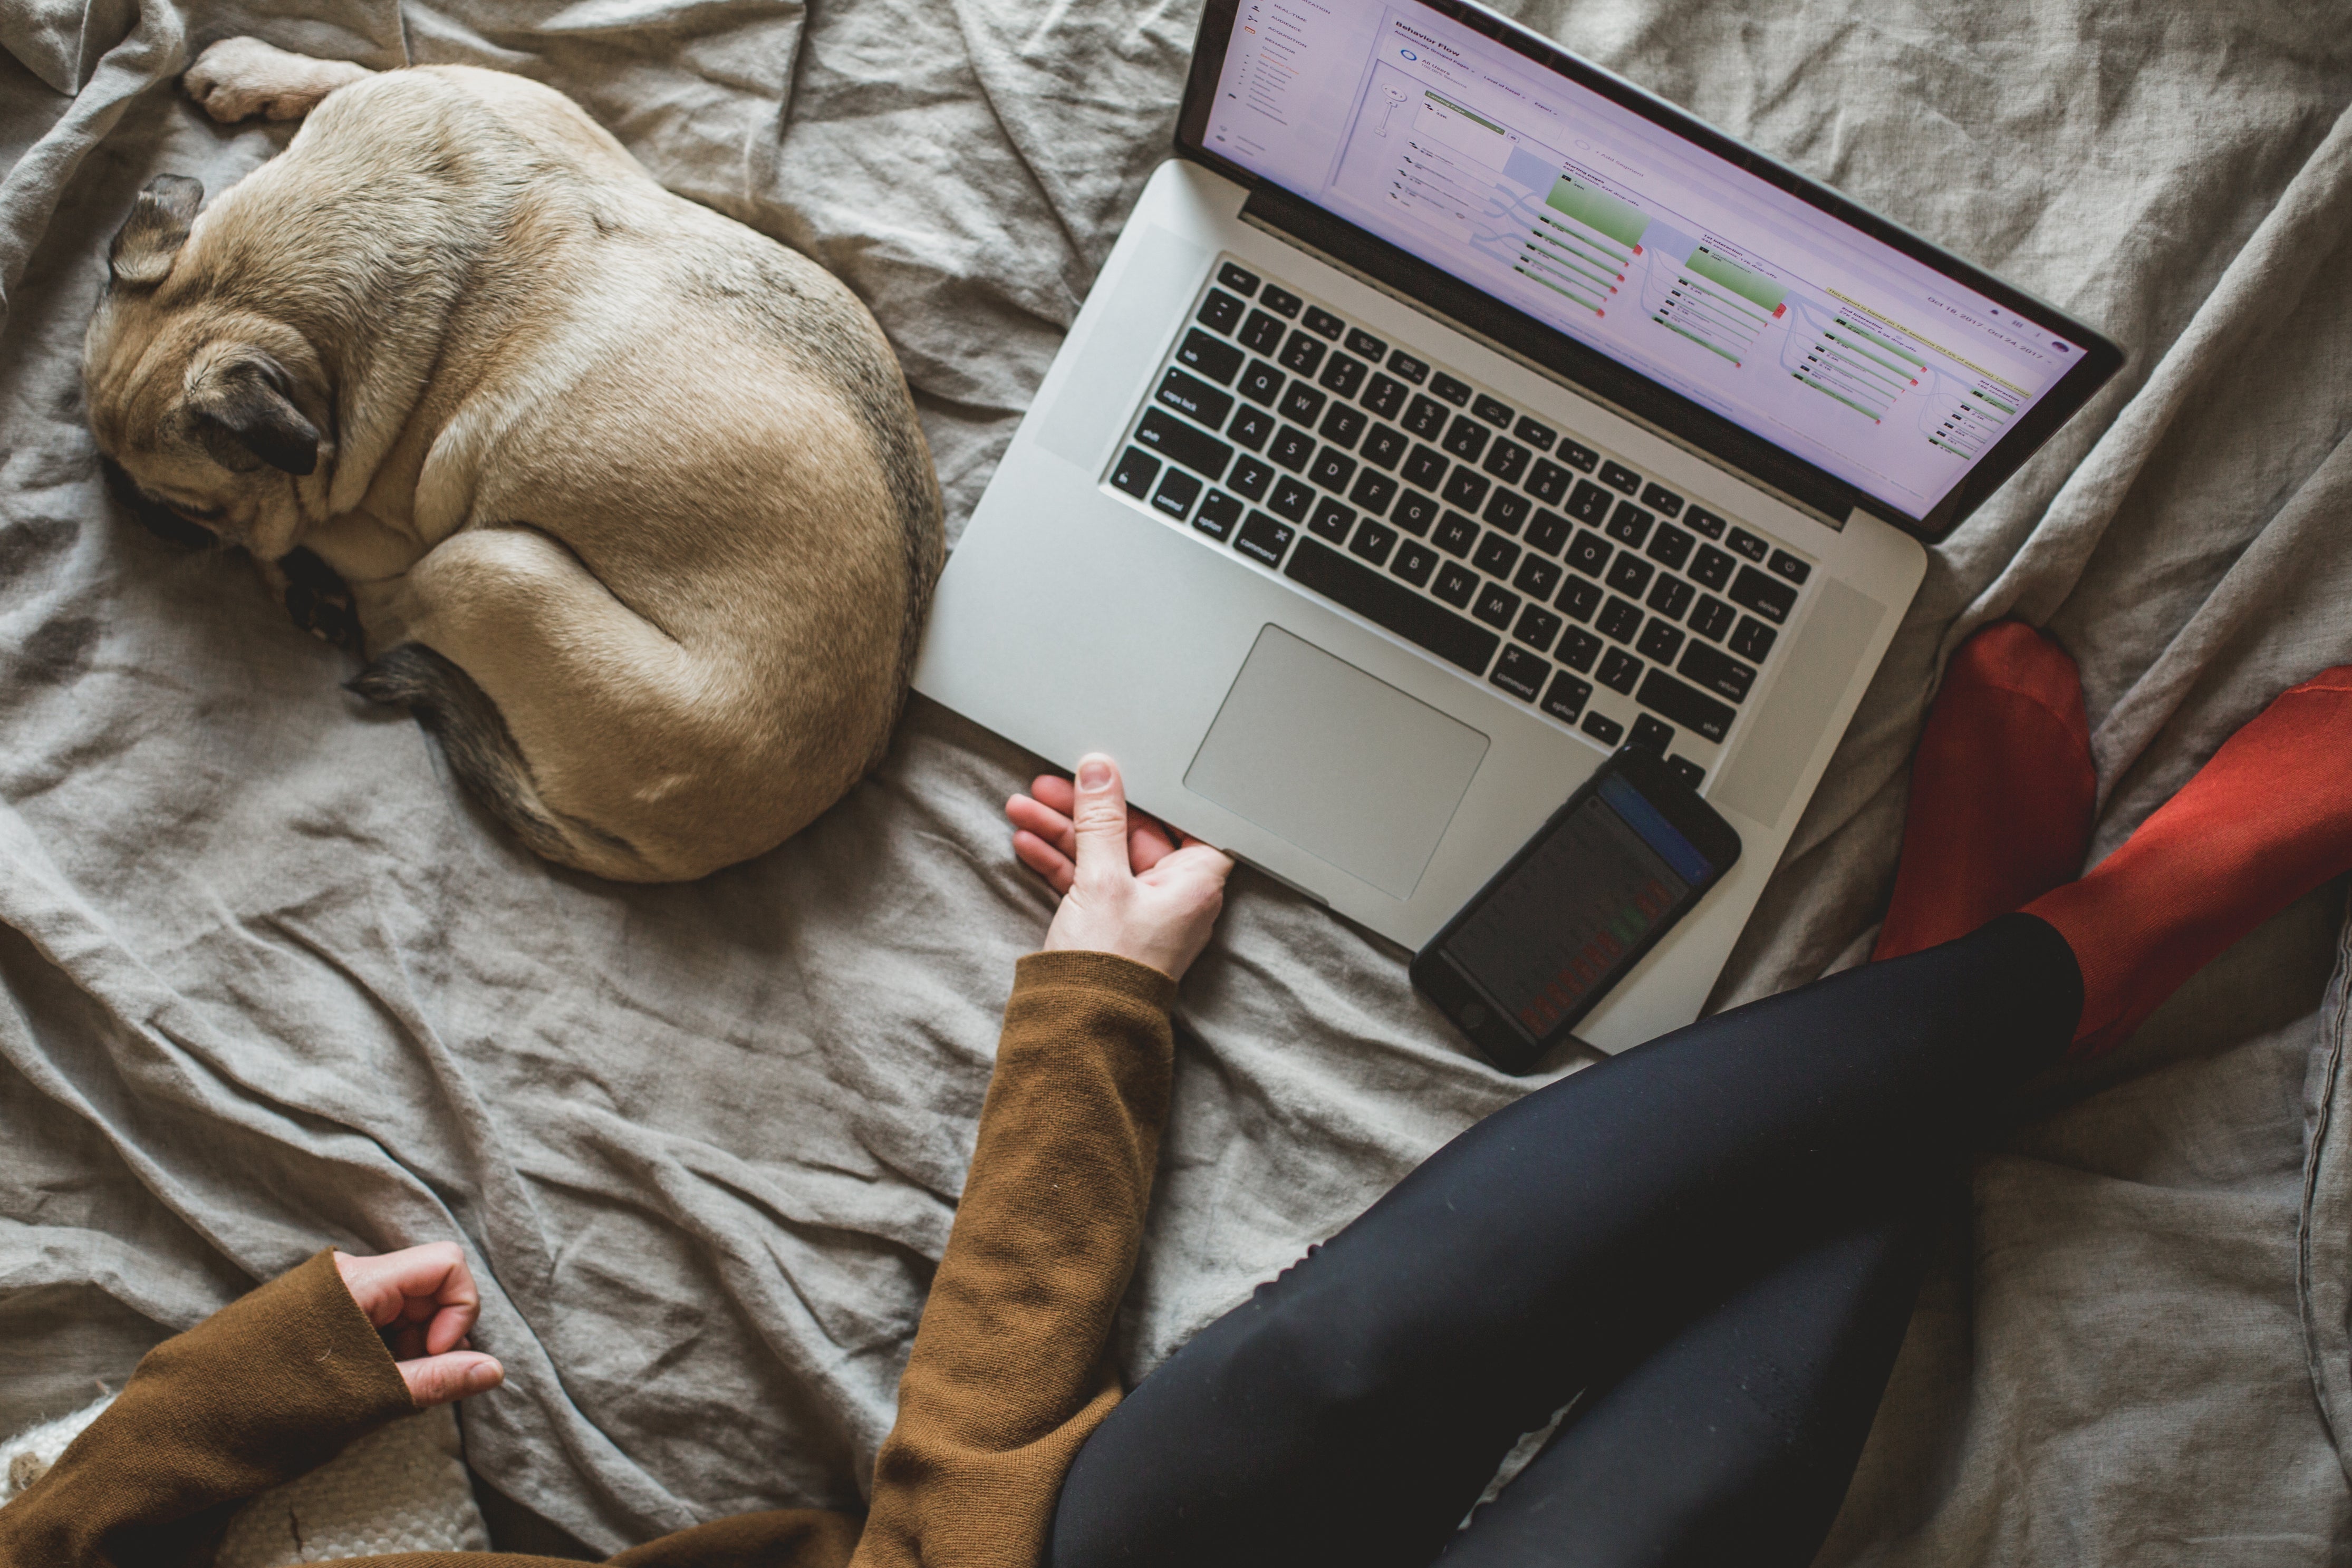 A person works on their business from a bed next to a sleeping dog.